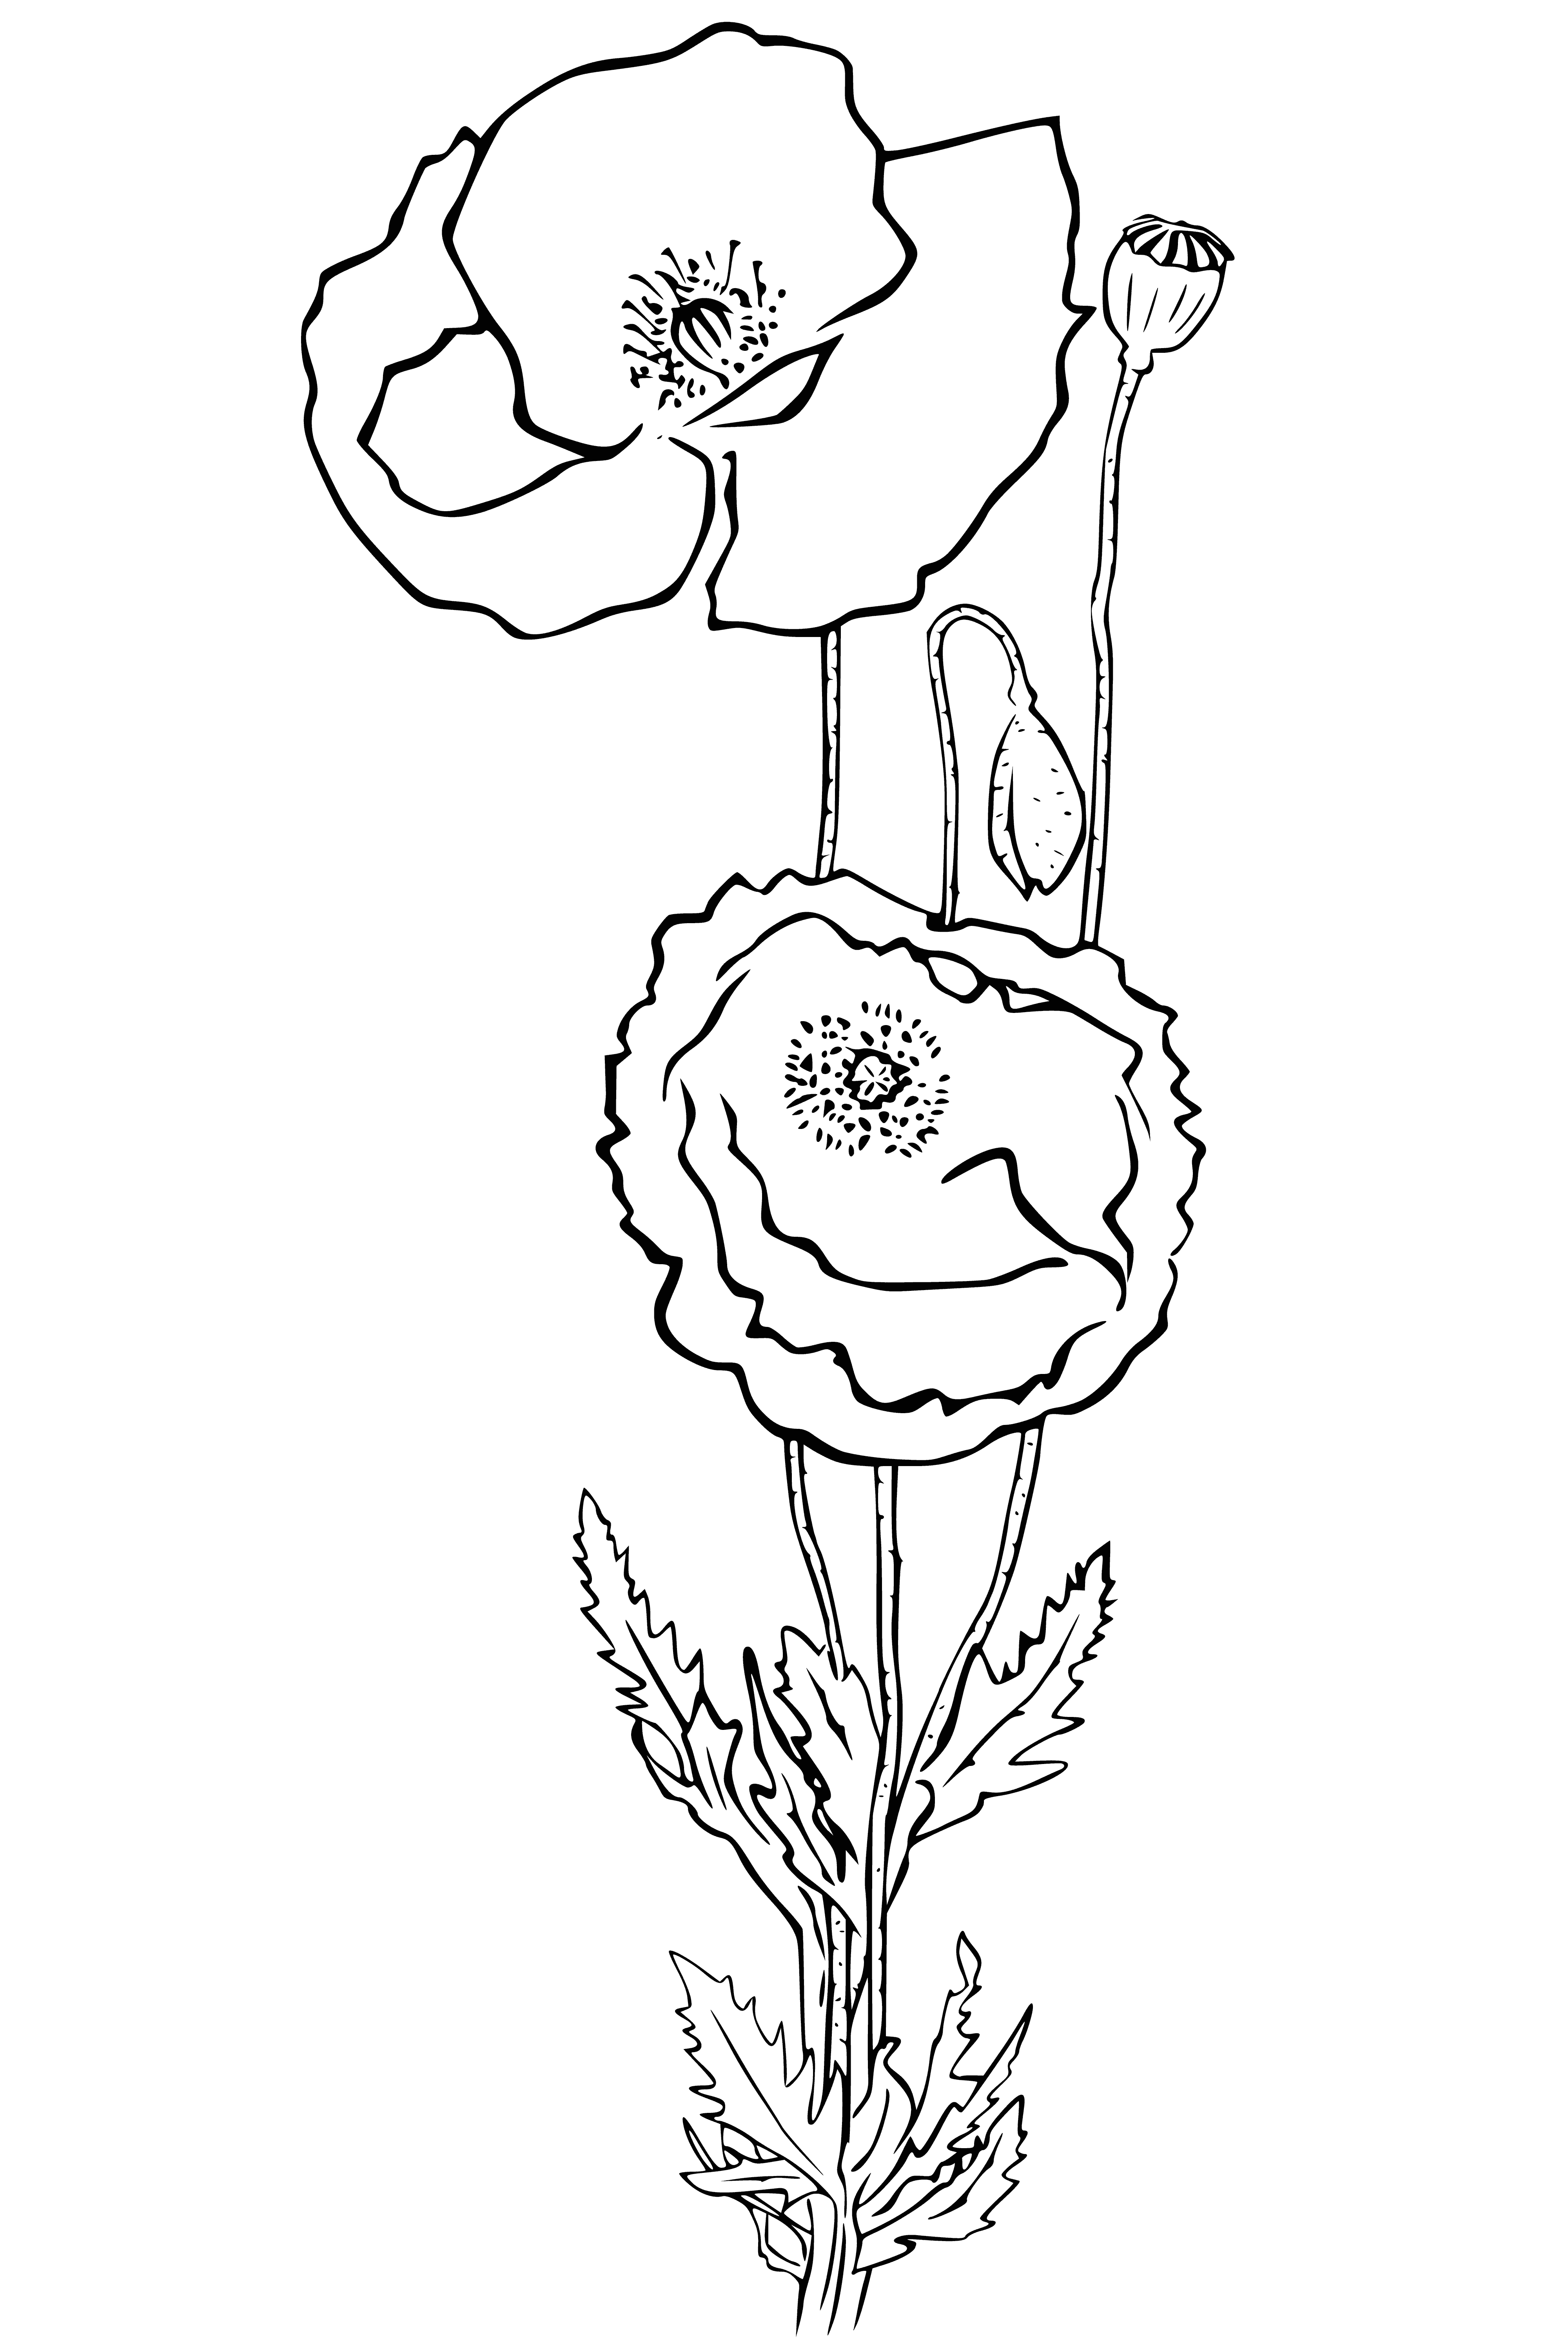 coloring page: A vase of roses, daisies, & lilies colors a white tablecloth on a table.